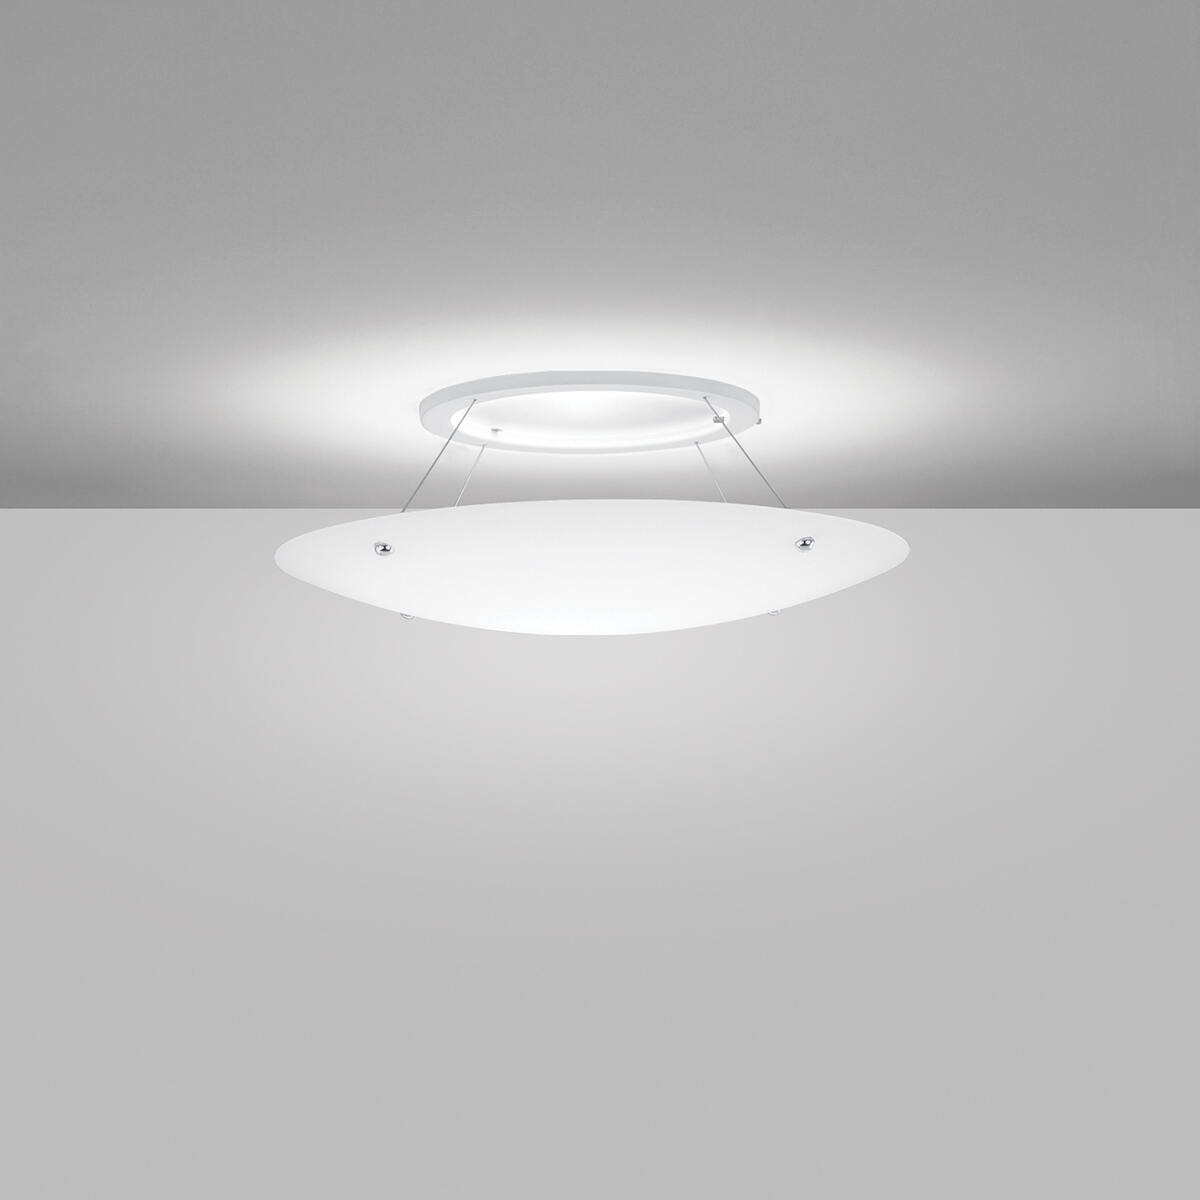 Ovation CM1680 Ceiling mount light fixture with the illusion of a pendant